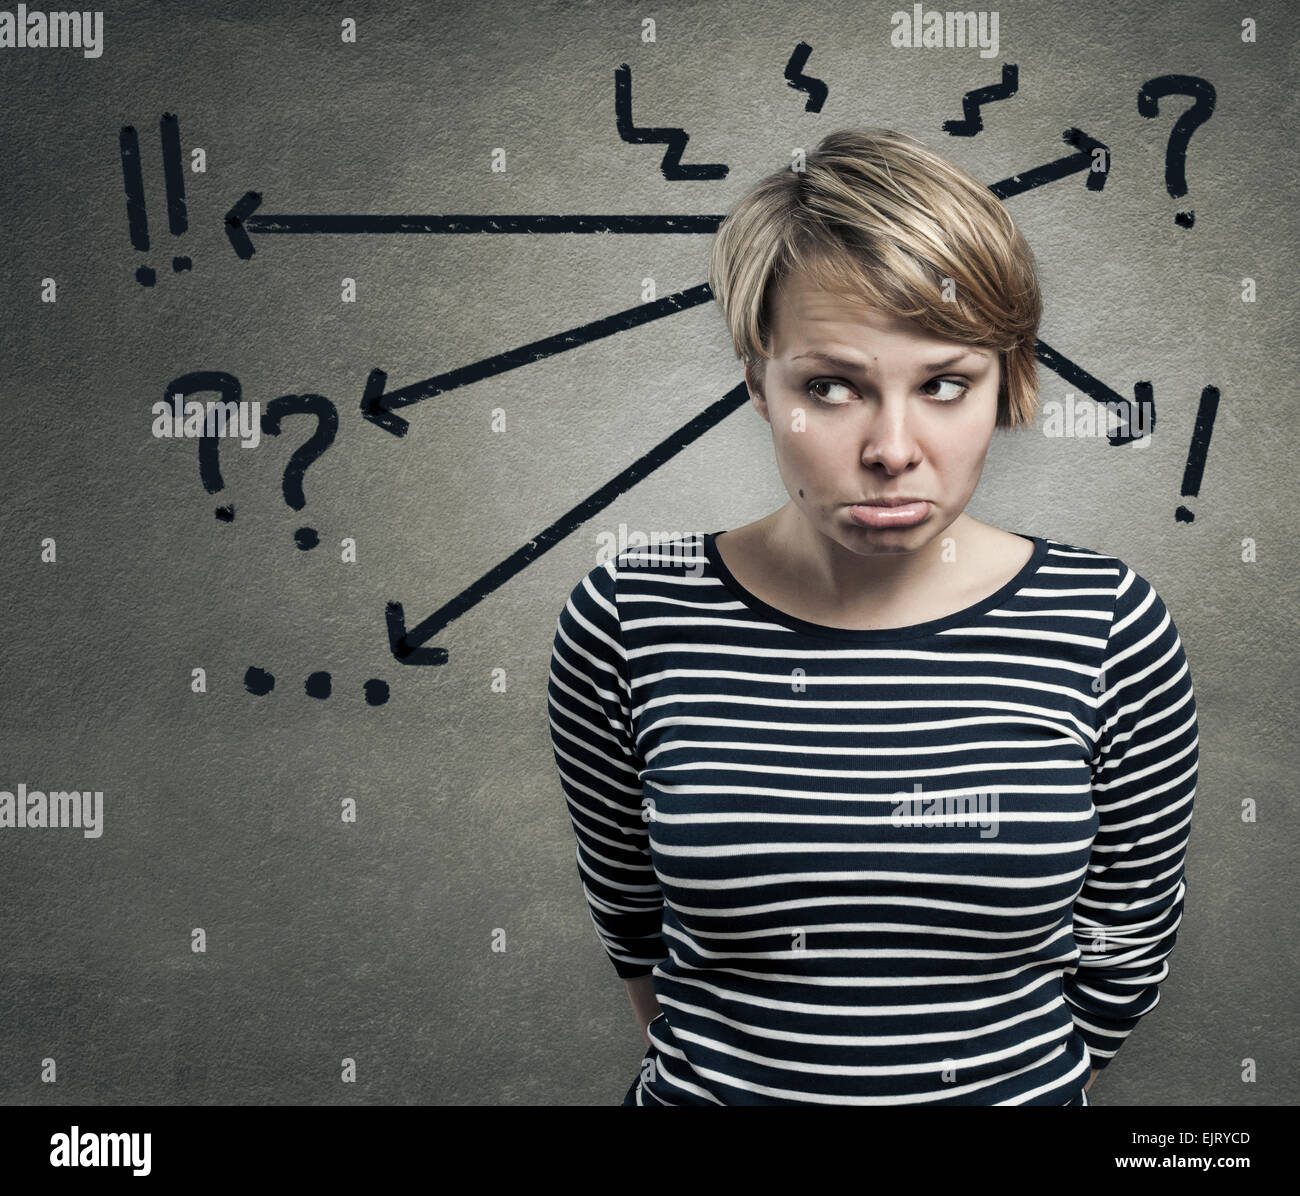 Illustration of a young woman in doubt, confusion concept Stock Photo